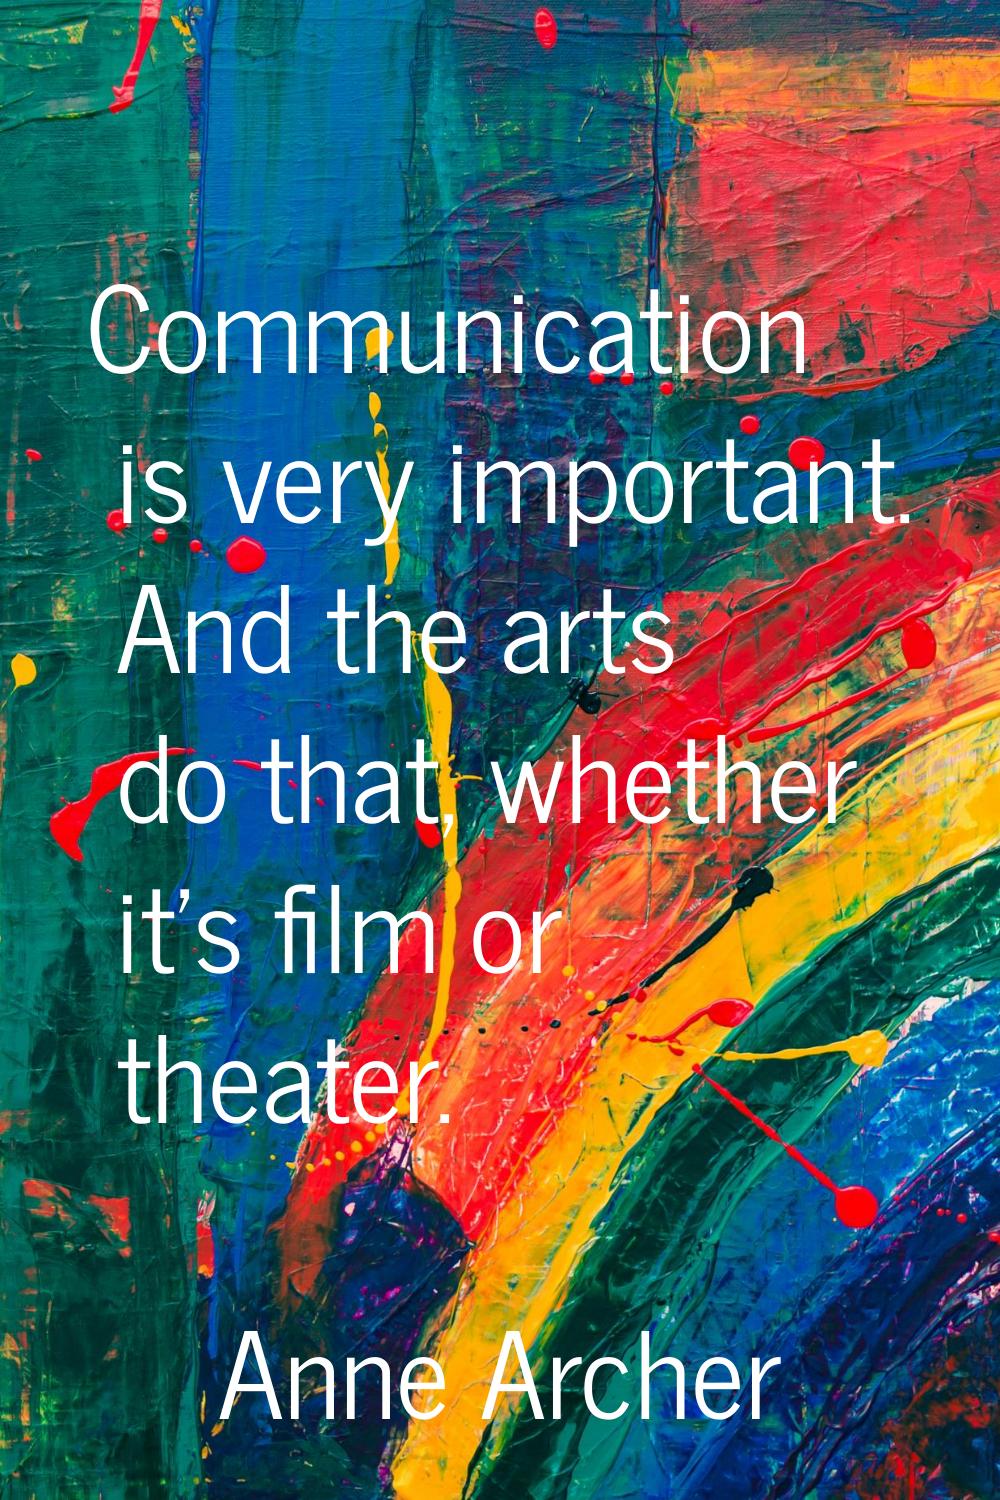 Communication is very important. And the arts do that, whether it's film or theater.